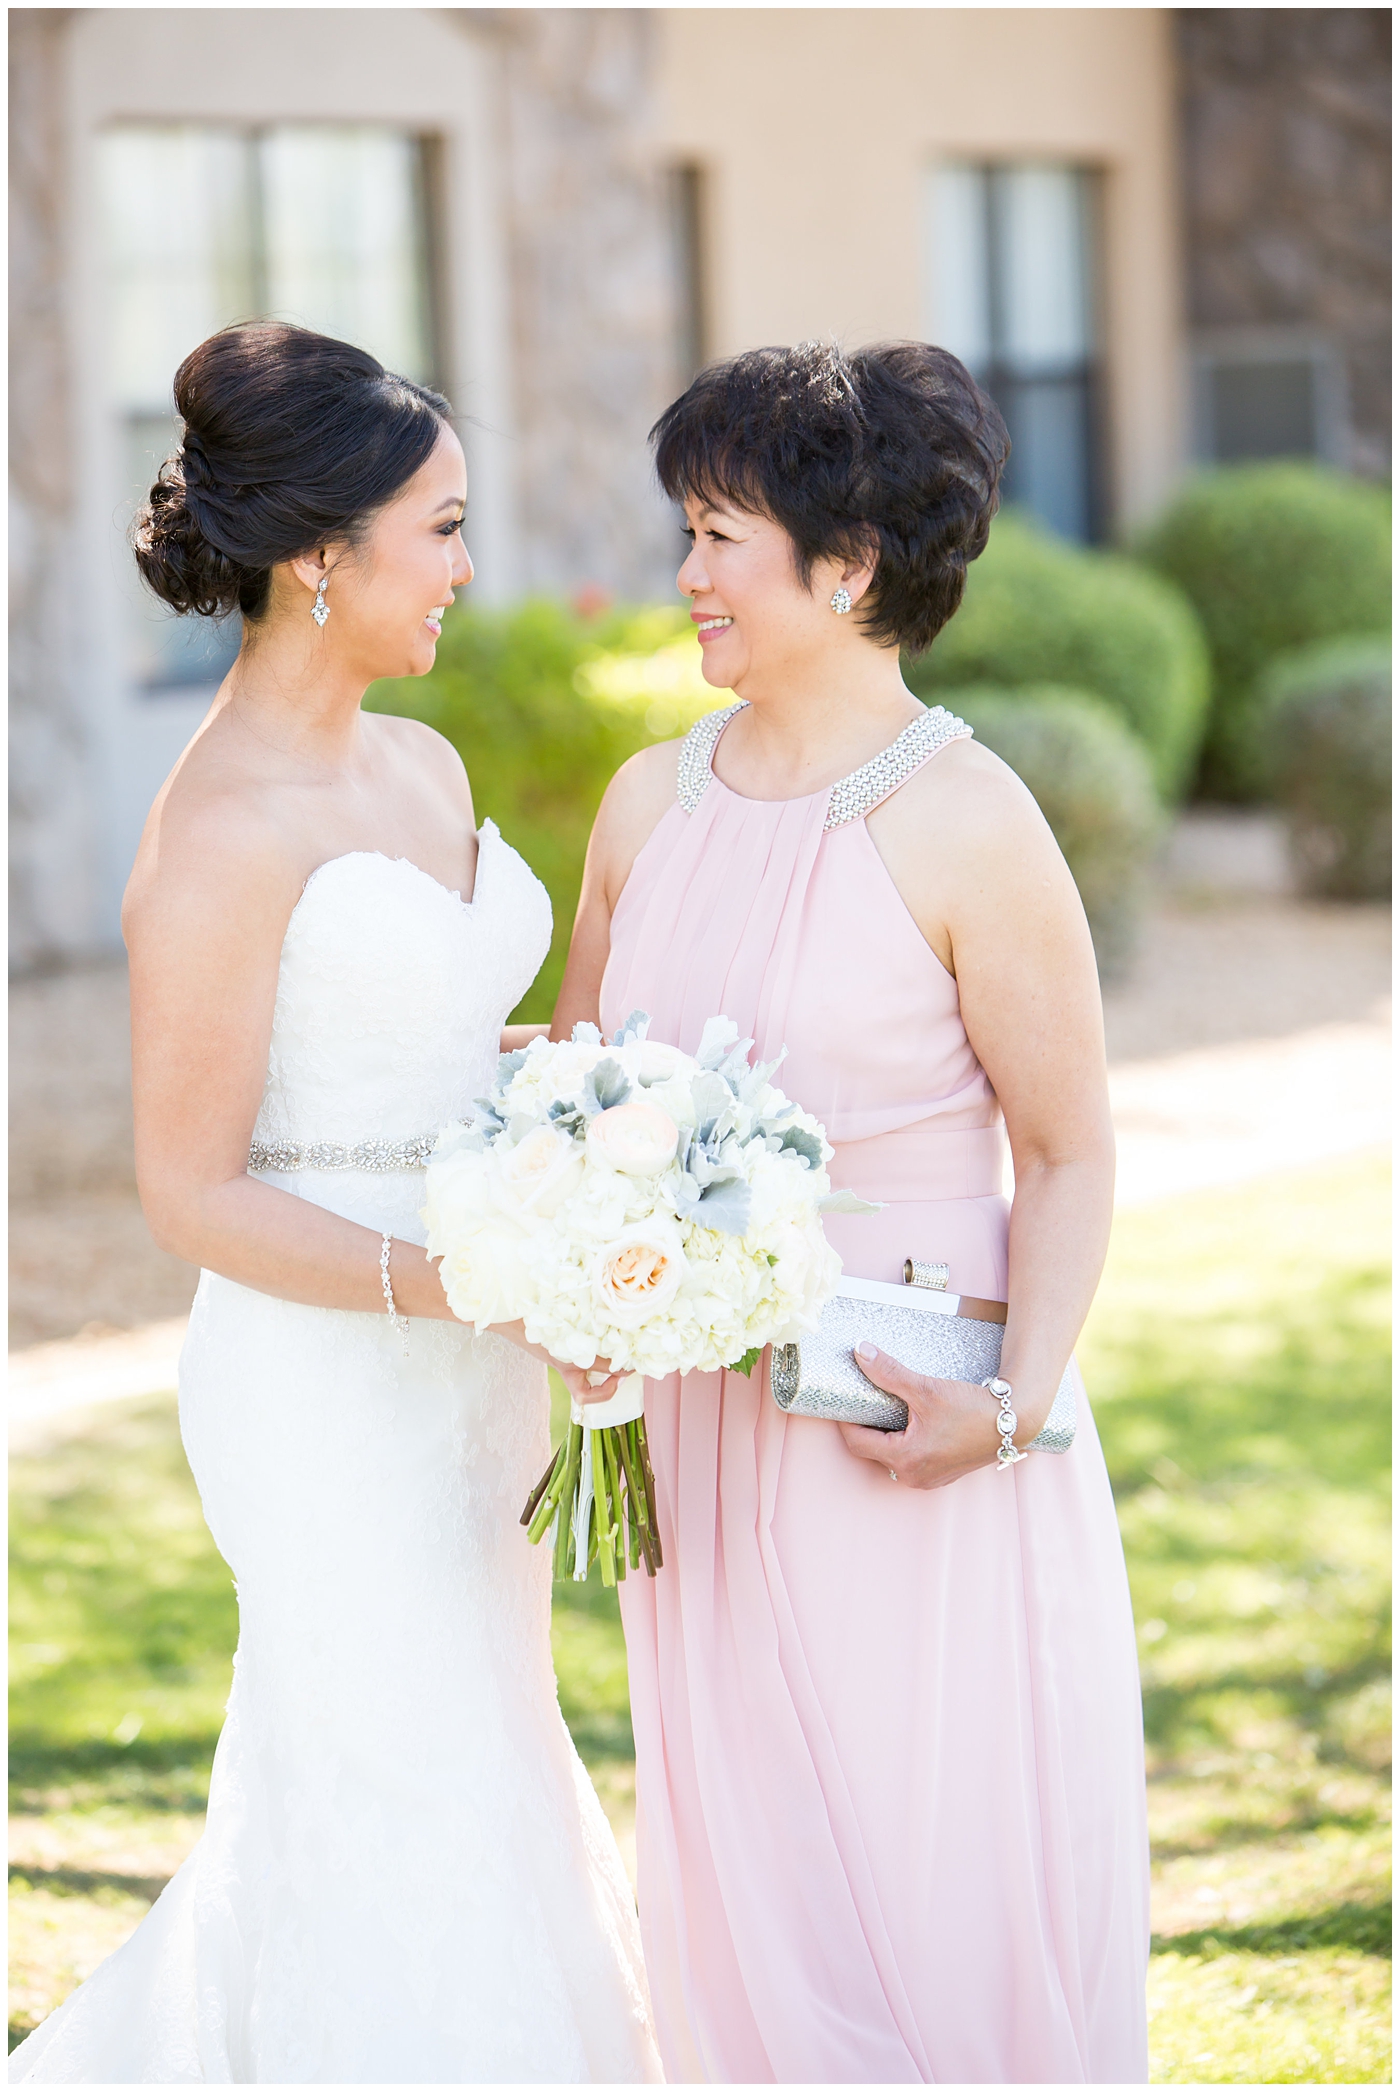 Bride in strapless maggie sorrento dress with soft white and pink roses, peonies, hydrangeas and greenery bouquet with mom in pink dress bridal portrait on wedding day